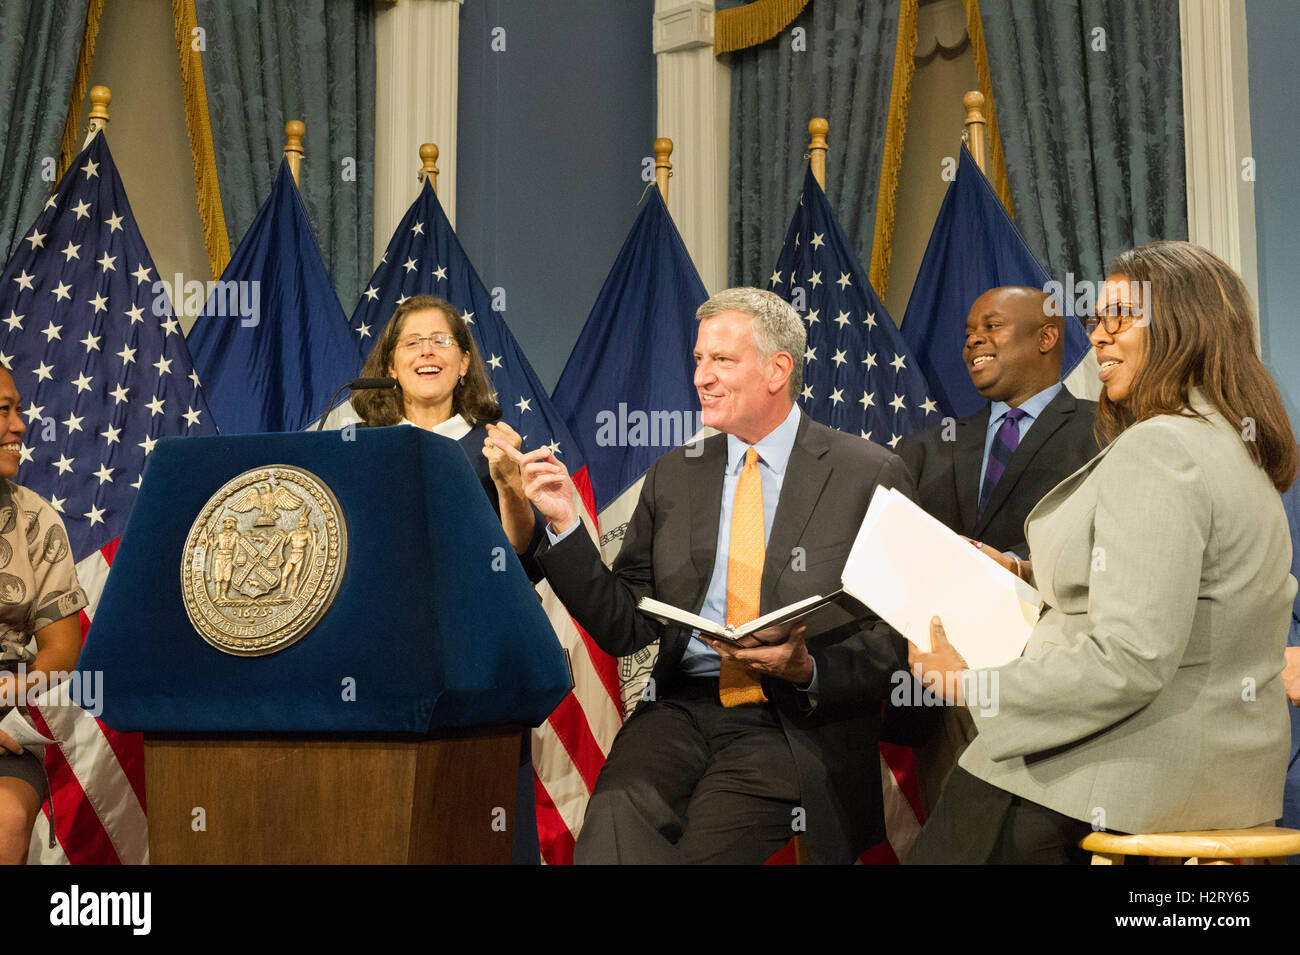 New York Mayor Bill de Blasio, center, at a bill signing related to increasing accountability and access for the New York's  Minority and Women owned Business Enterprise program on Wednesday, September 28, 2016 in New York. (© Frances M. Roberts) Stock Photo